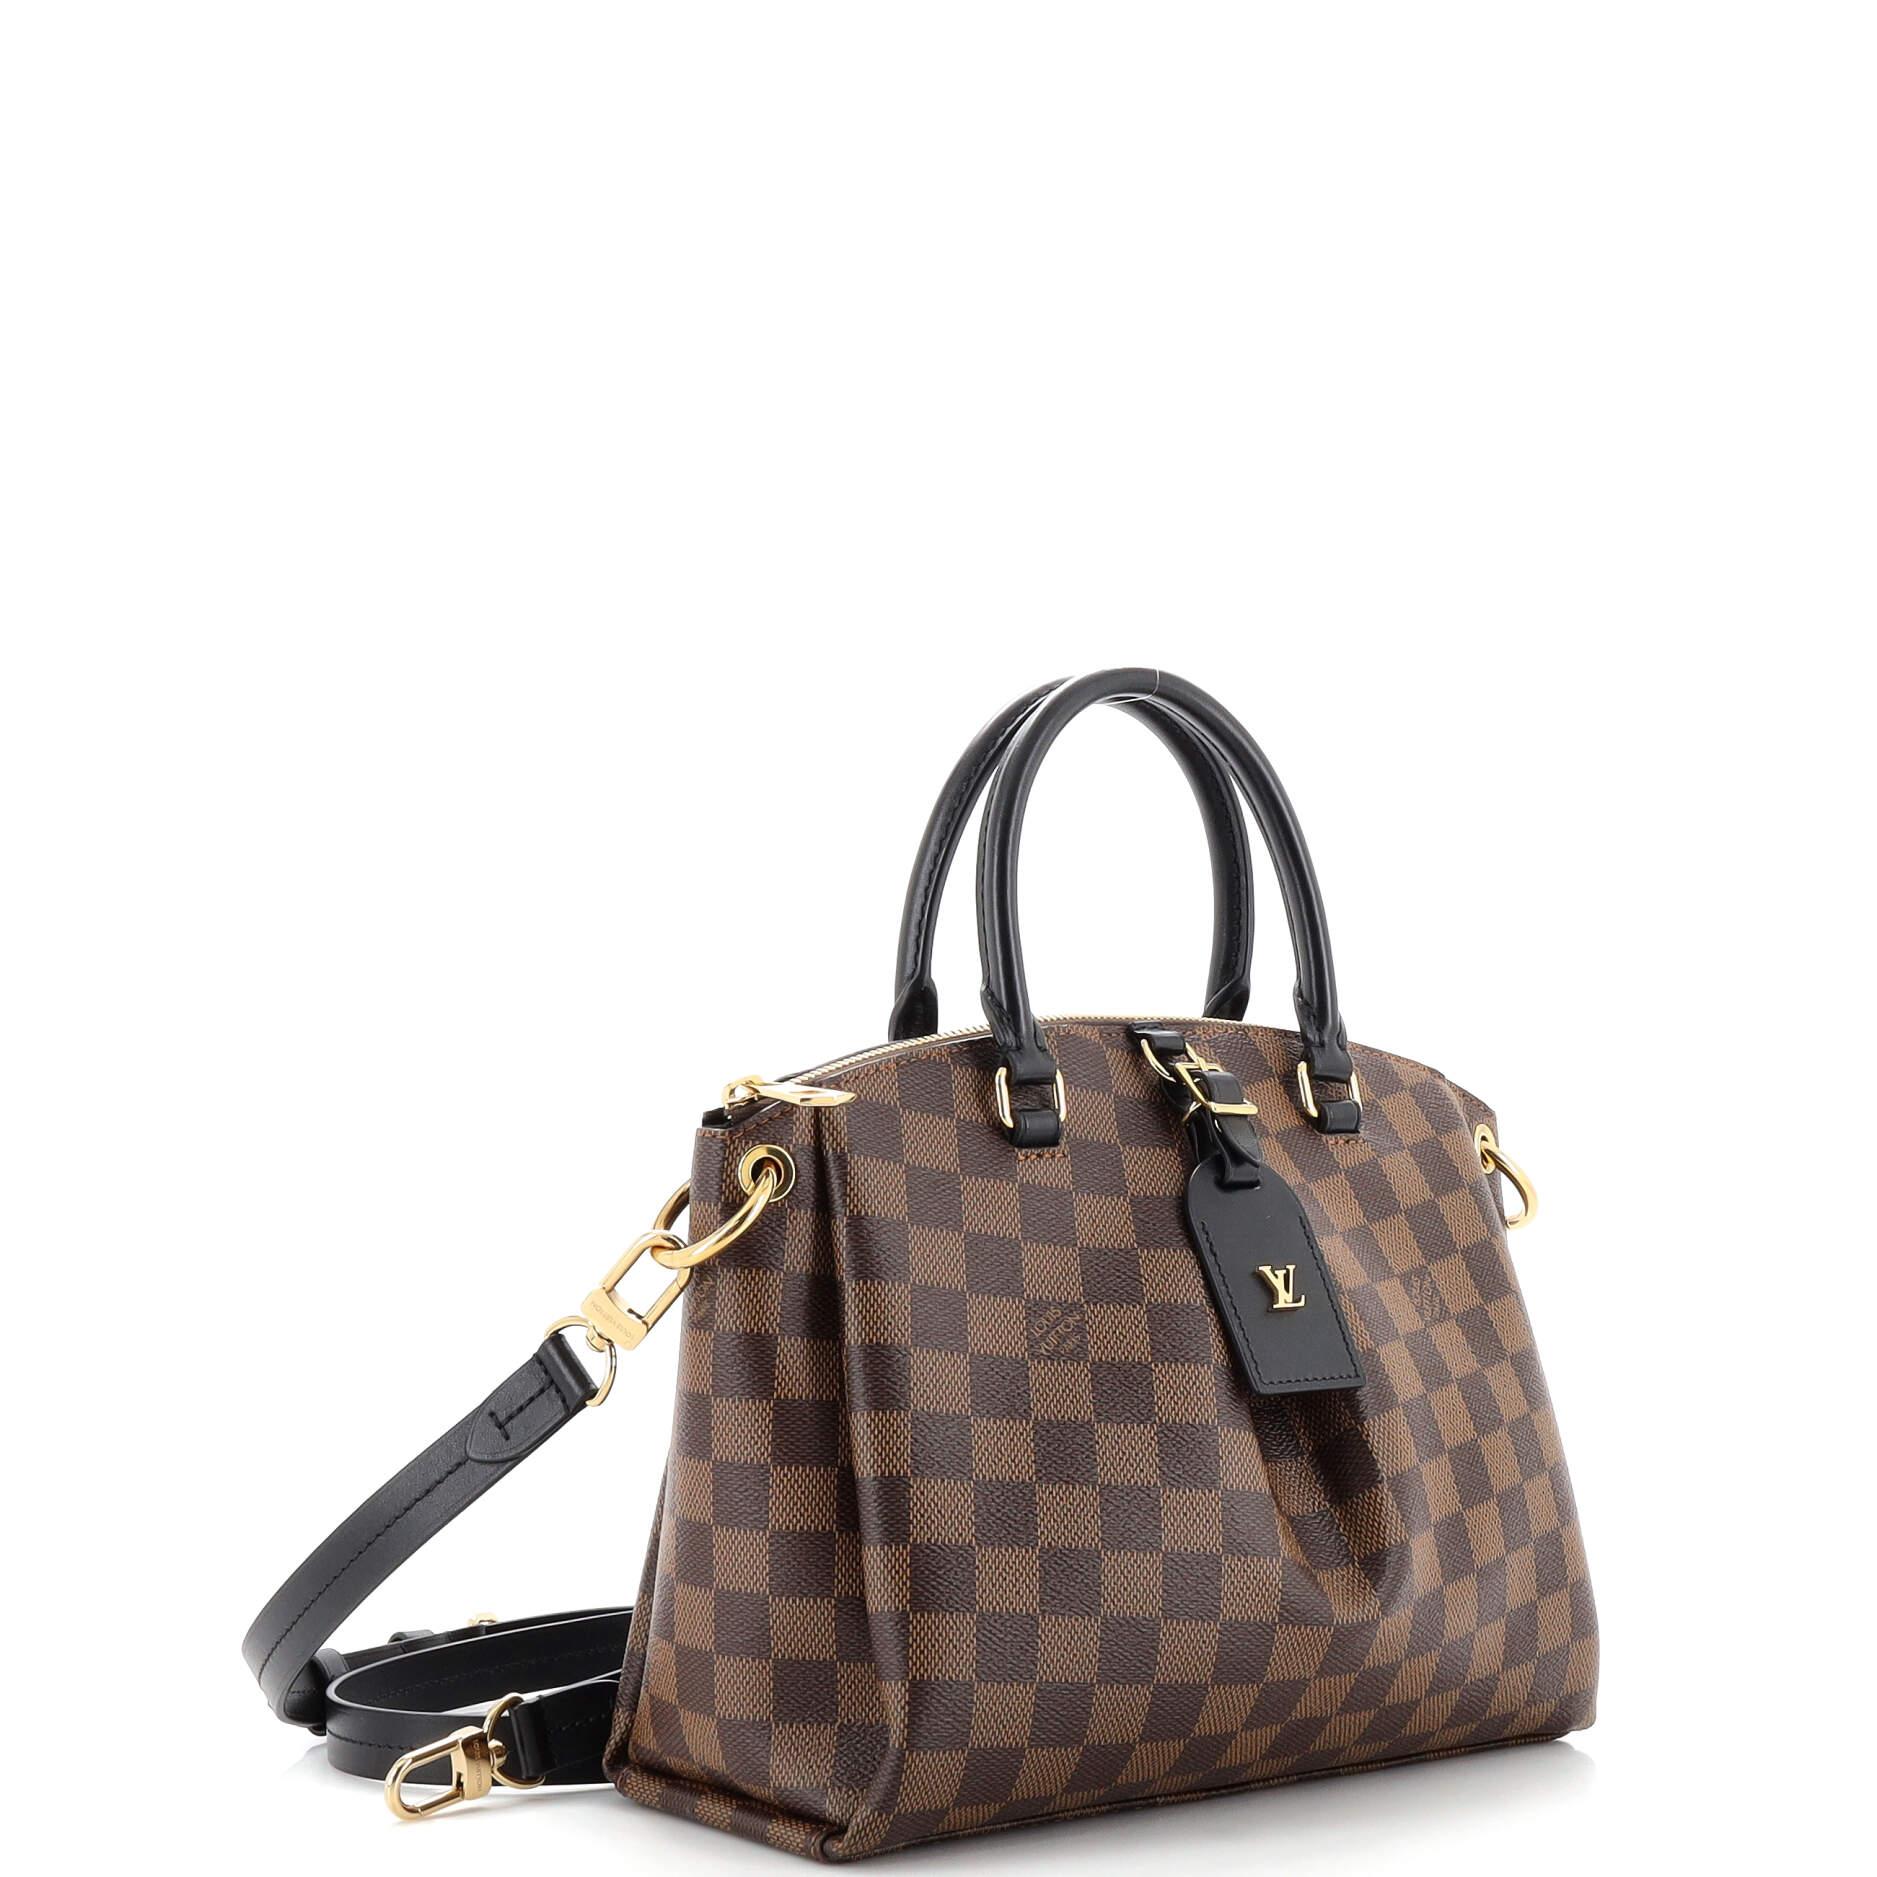 LV Odeon Tote PM vs Sienna PM  What Fits in the LV Odeon PM 